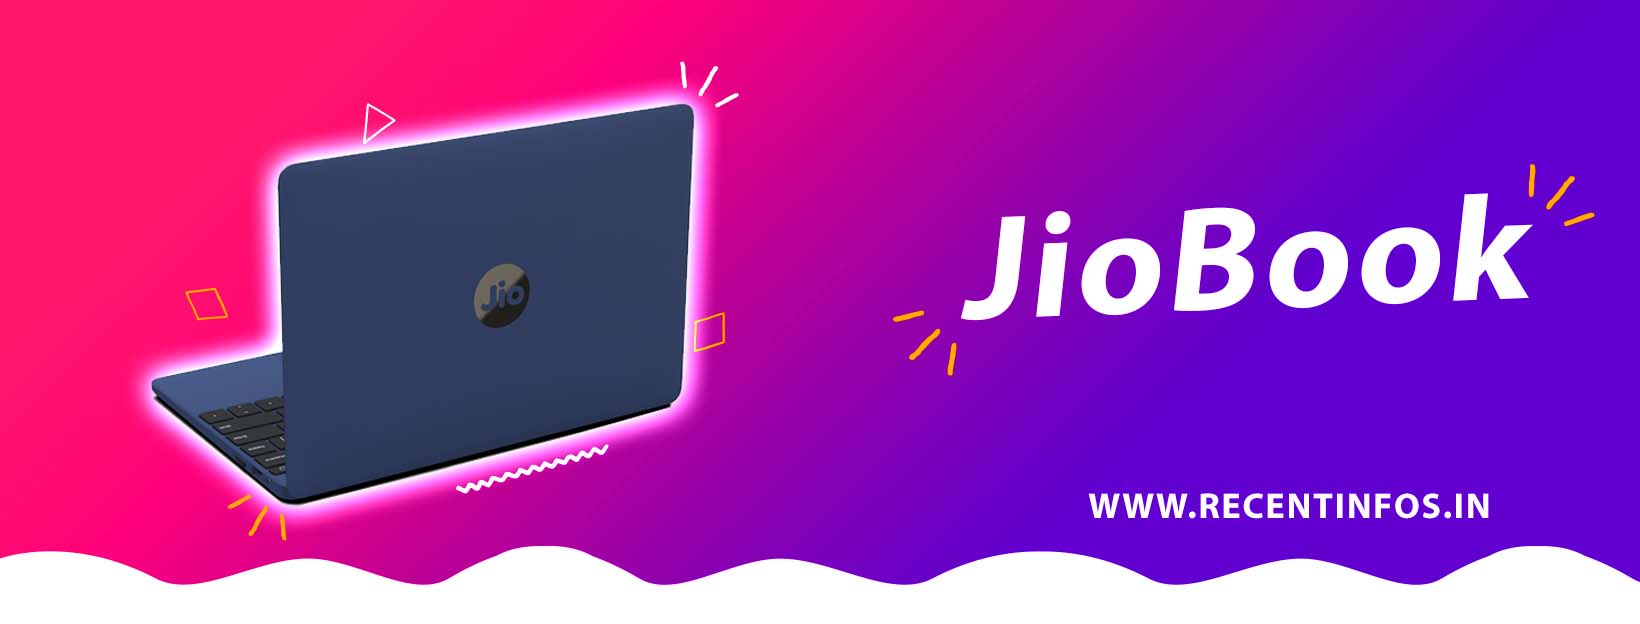 JioBook Laptop Launched in India: Price, Specifications, Features, Launch Date and Complete Details